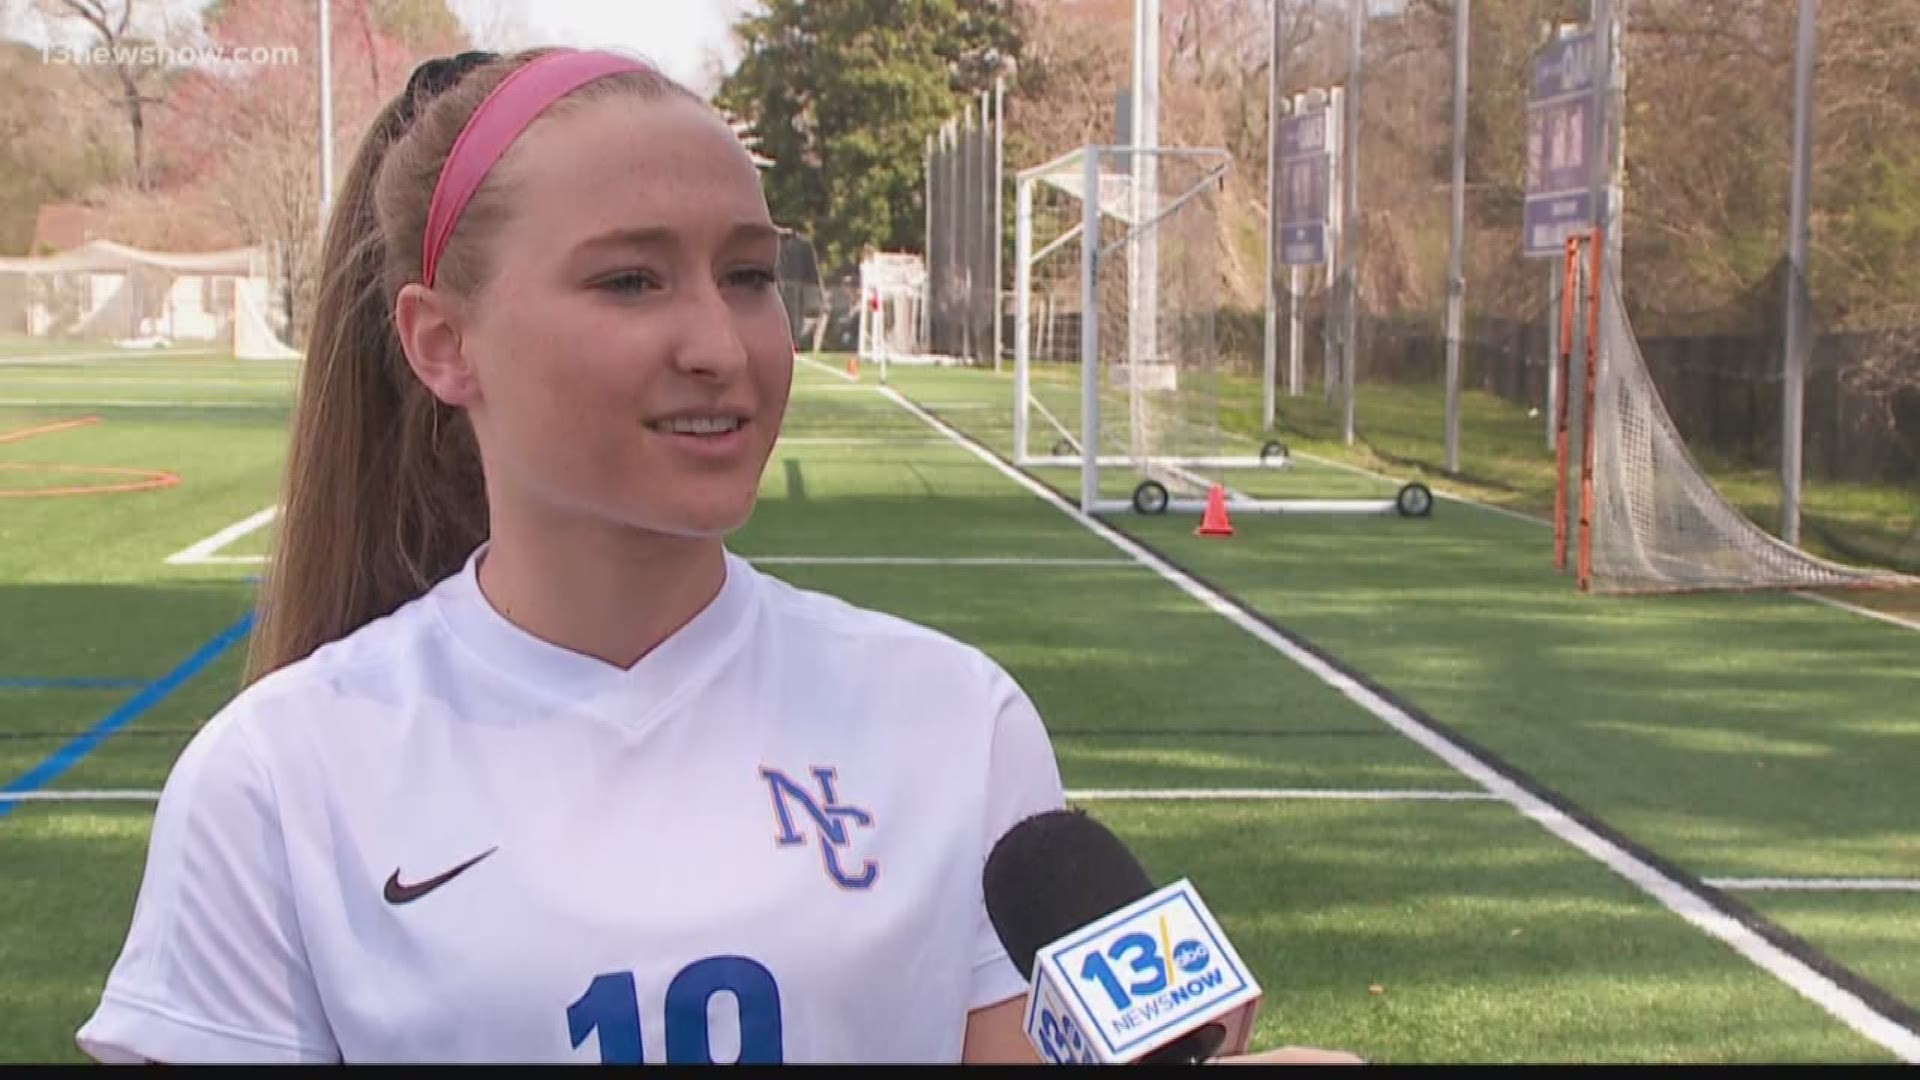 A midfielder on the Oaks girl's soccer team, Smith overcame a torn ACL injury and is back to being on top of her game.